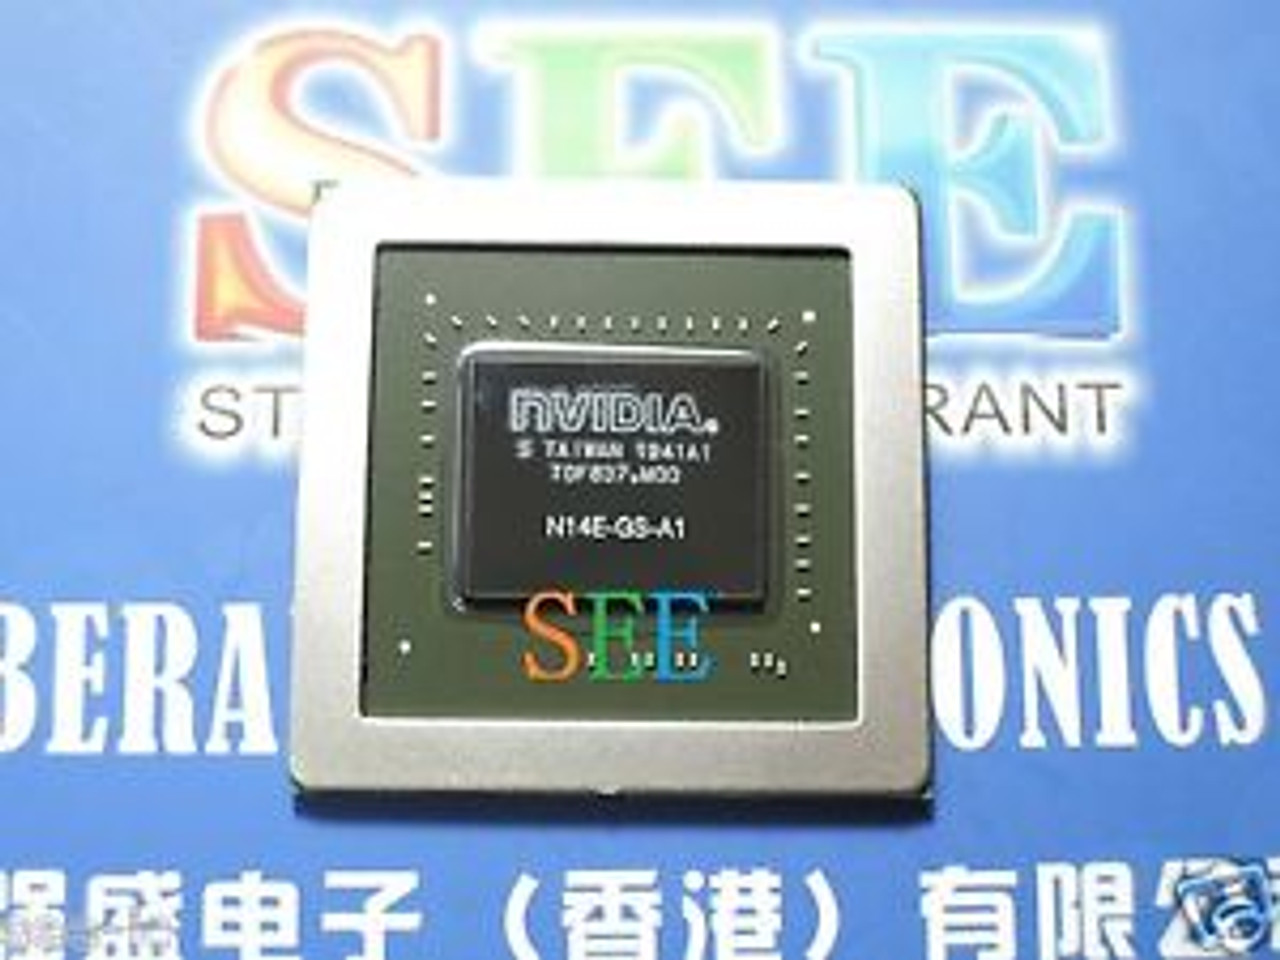 TAIWAN Brand New N14P-GV2-S-A1 Graphic Chipset DC:2014 